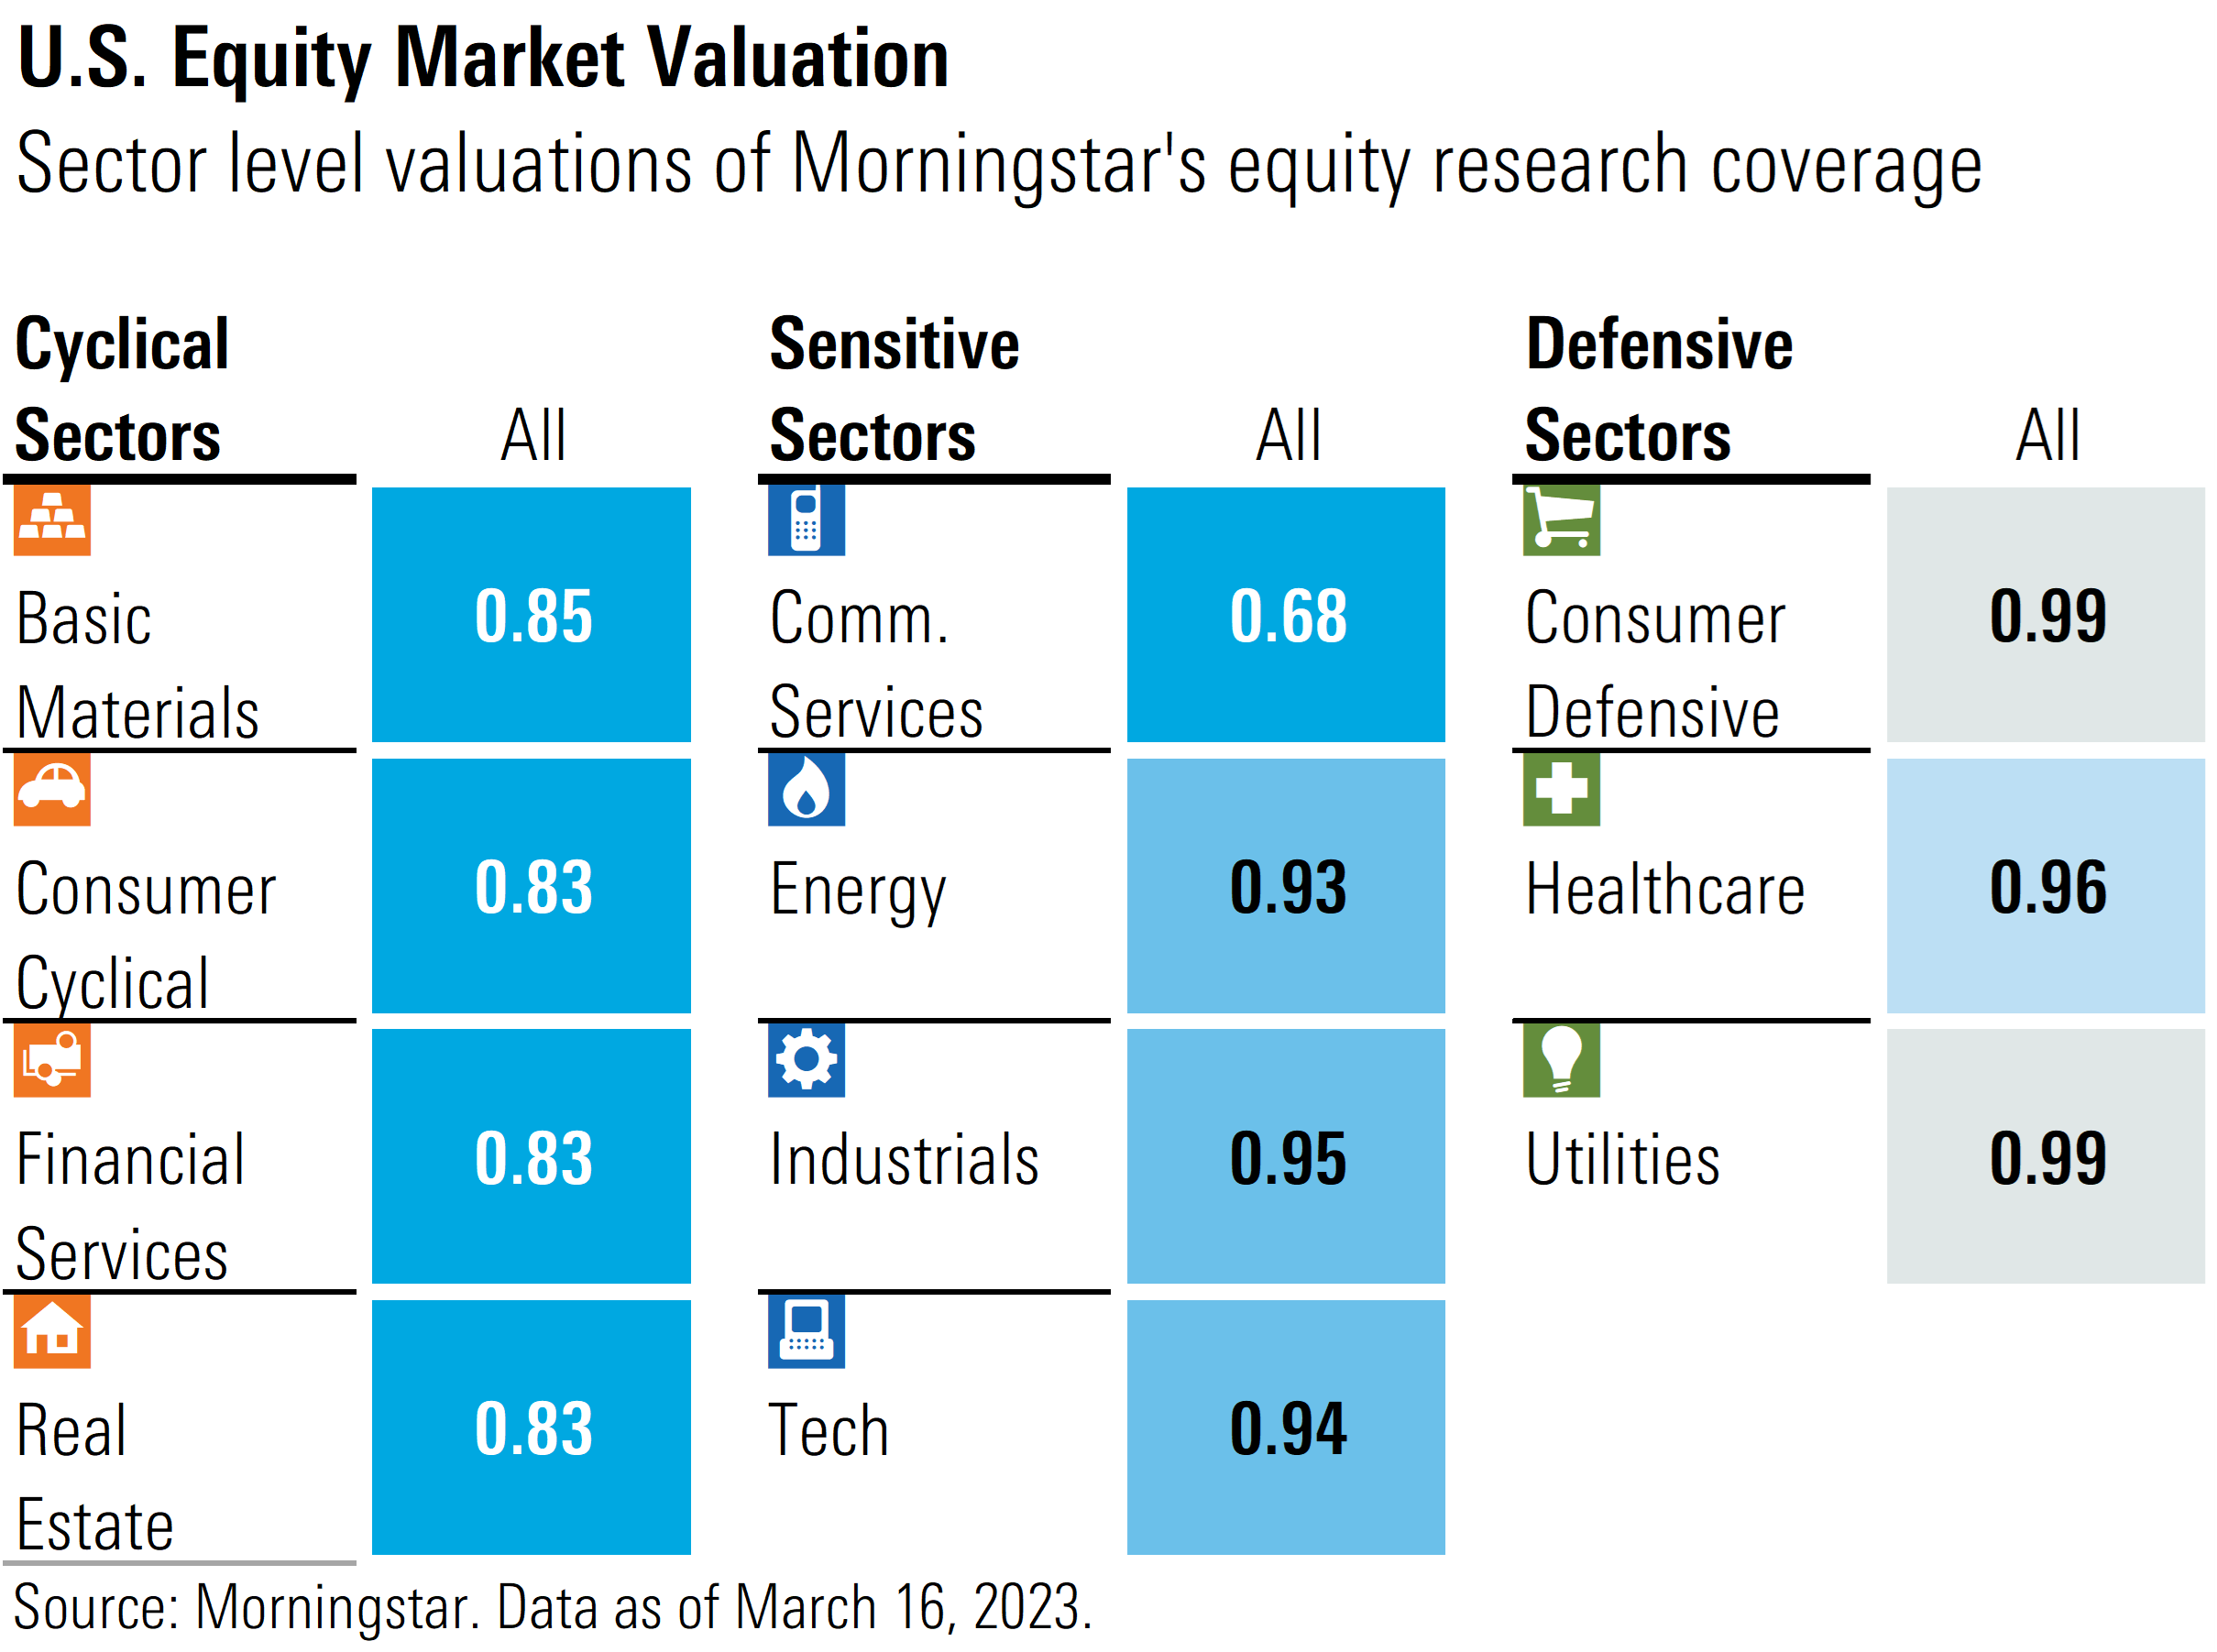 Graphical representation of US equity market valuations as broken down by sector